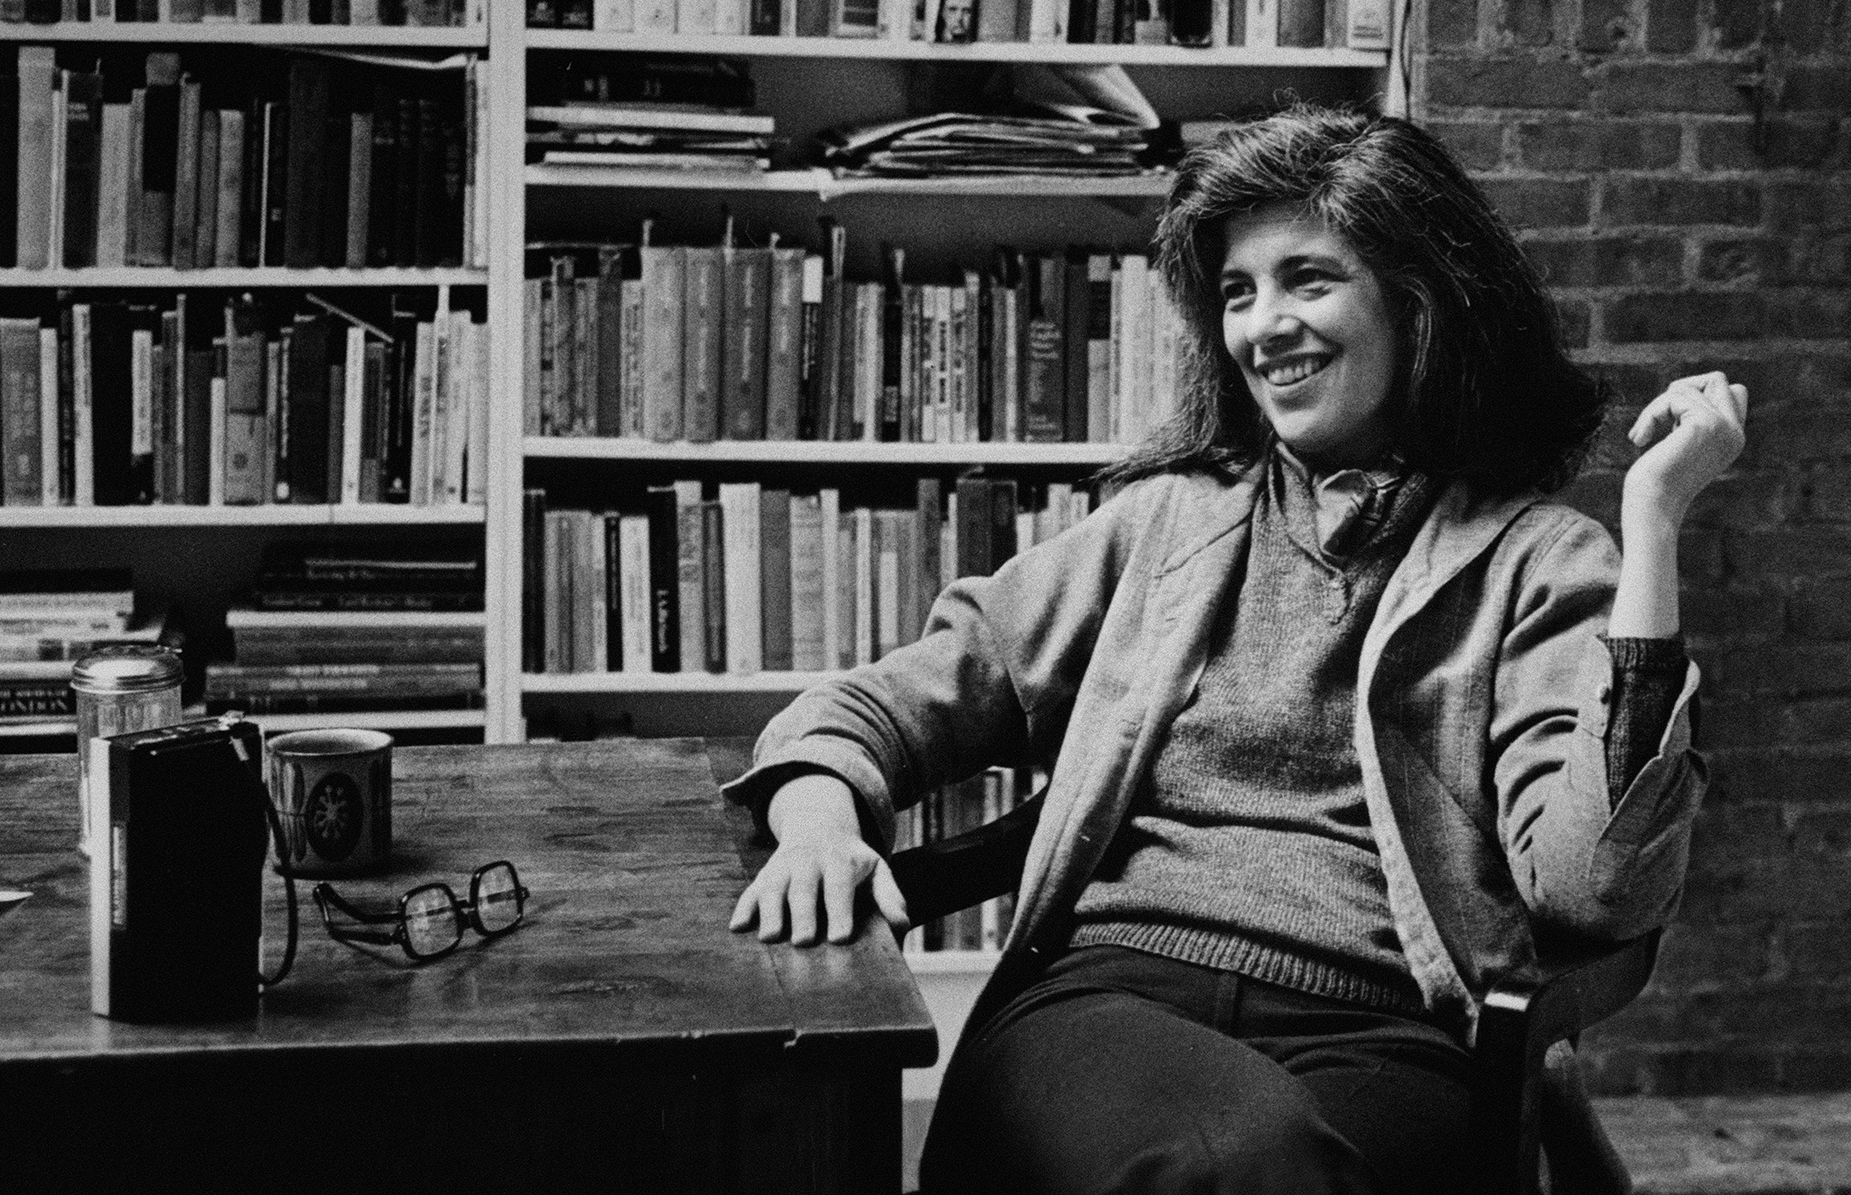 Susan Sontag s Theories About Photography